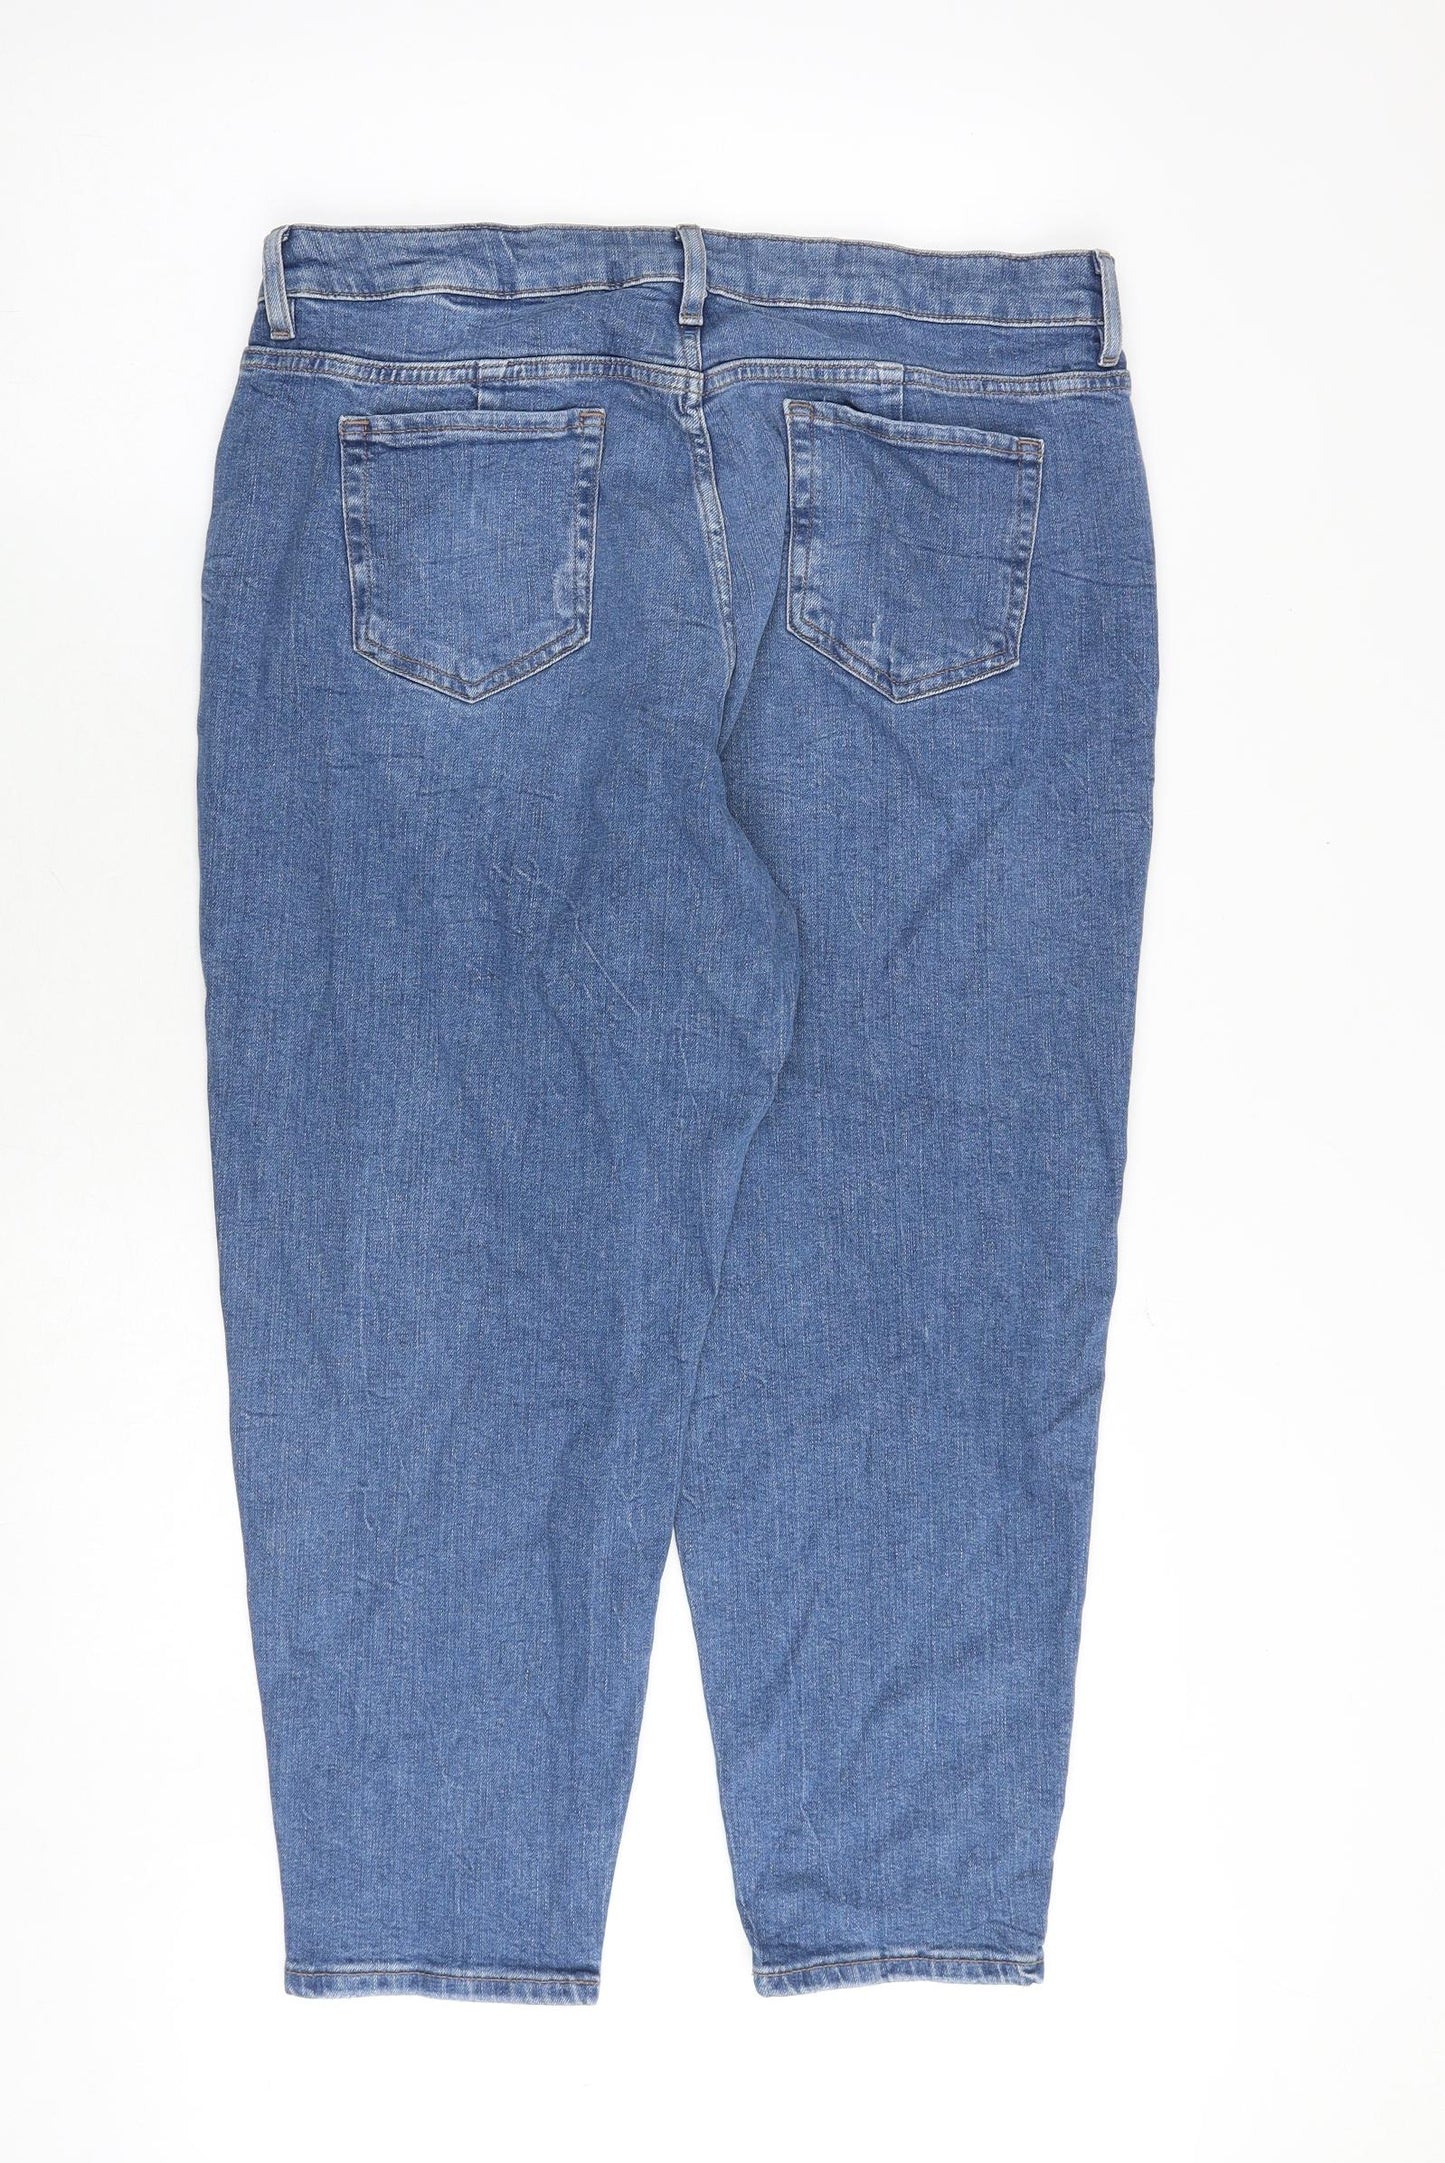 Marks and Spencer Womens Blue Cotton Mom Jeans Size 16 Regular Zip